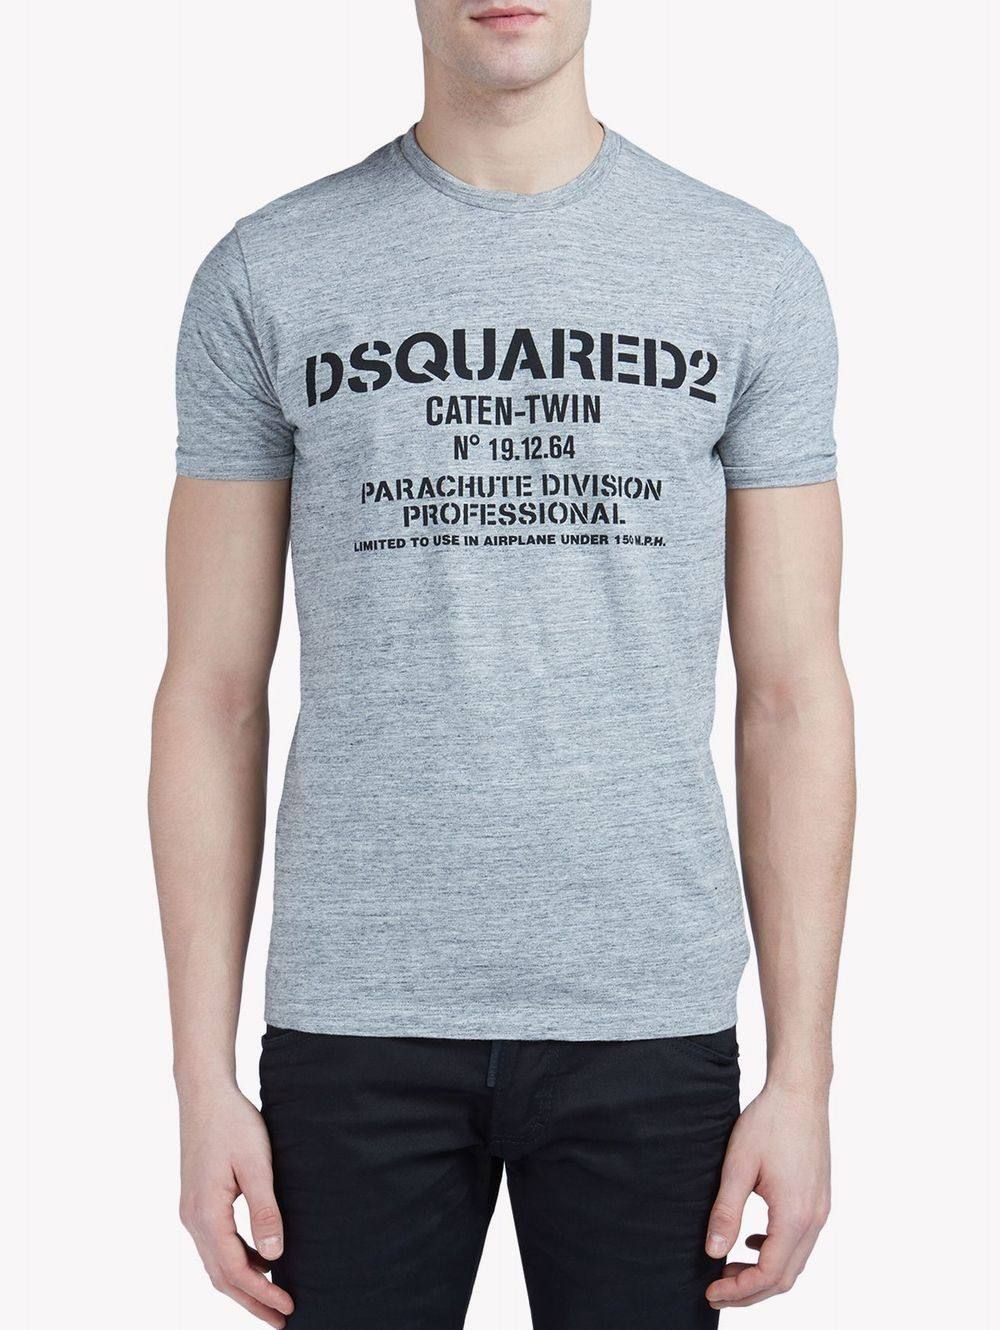 Dsquared2 - DSQUARED 2 (ディースクエアード) ロゴ プリント Tシャツ